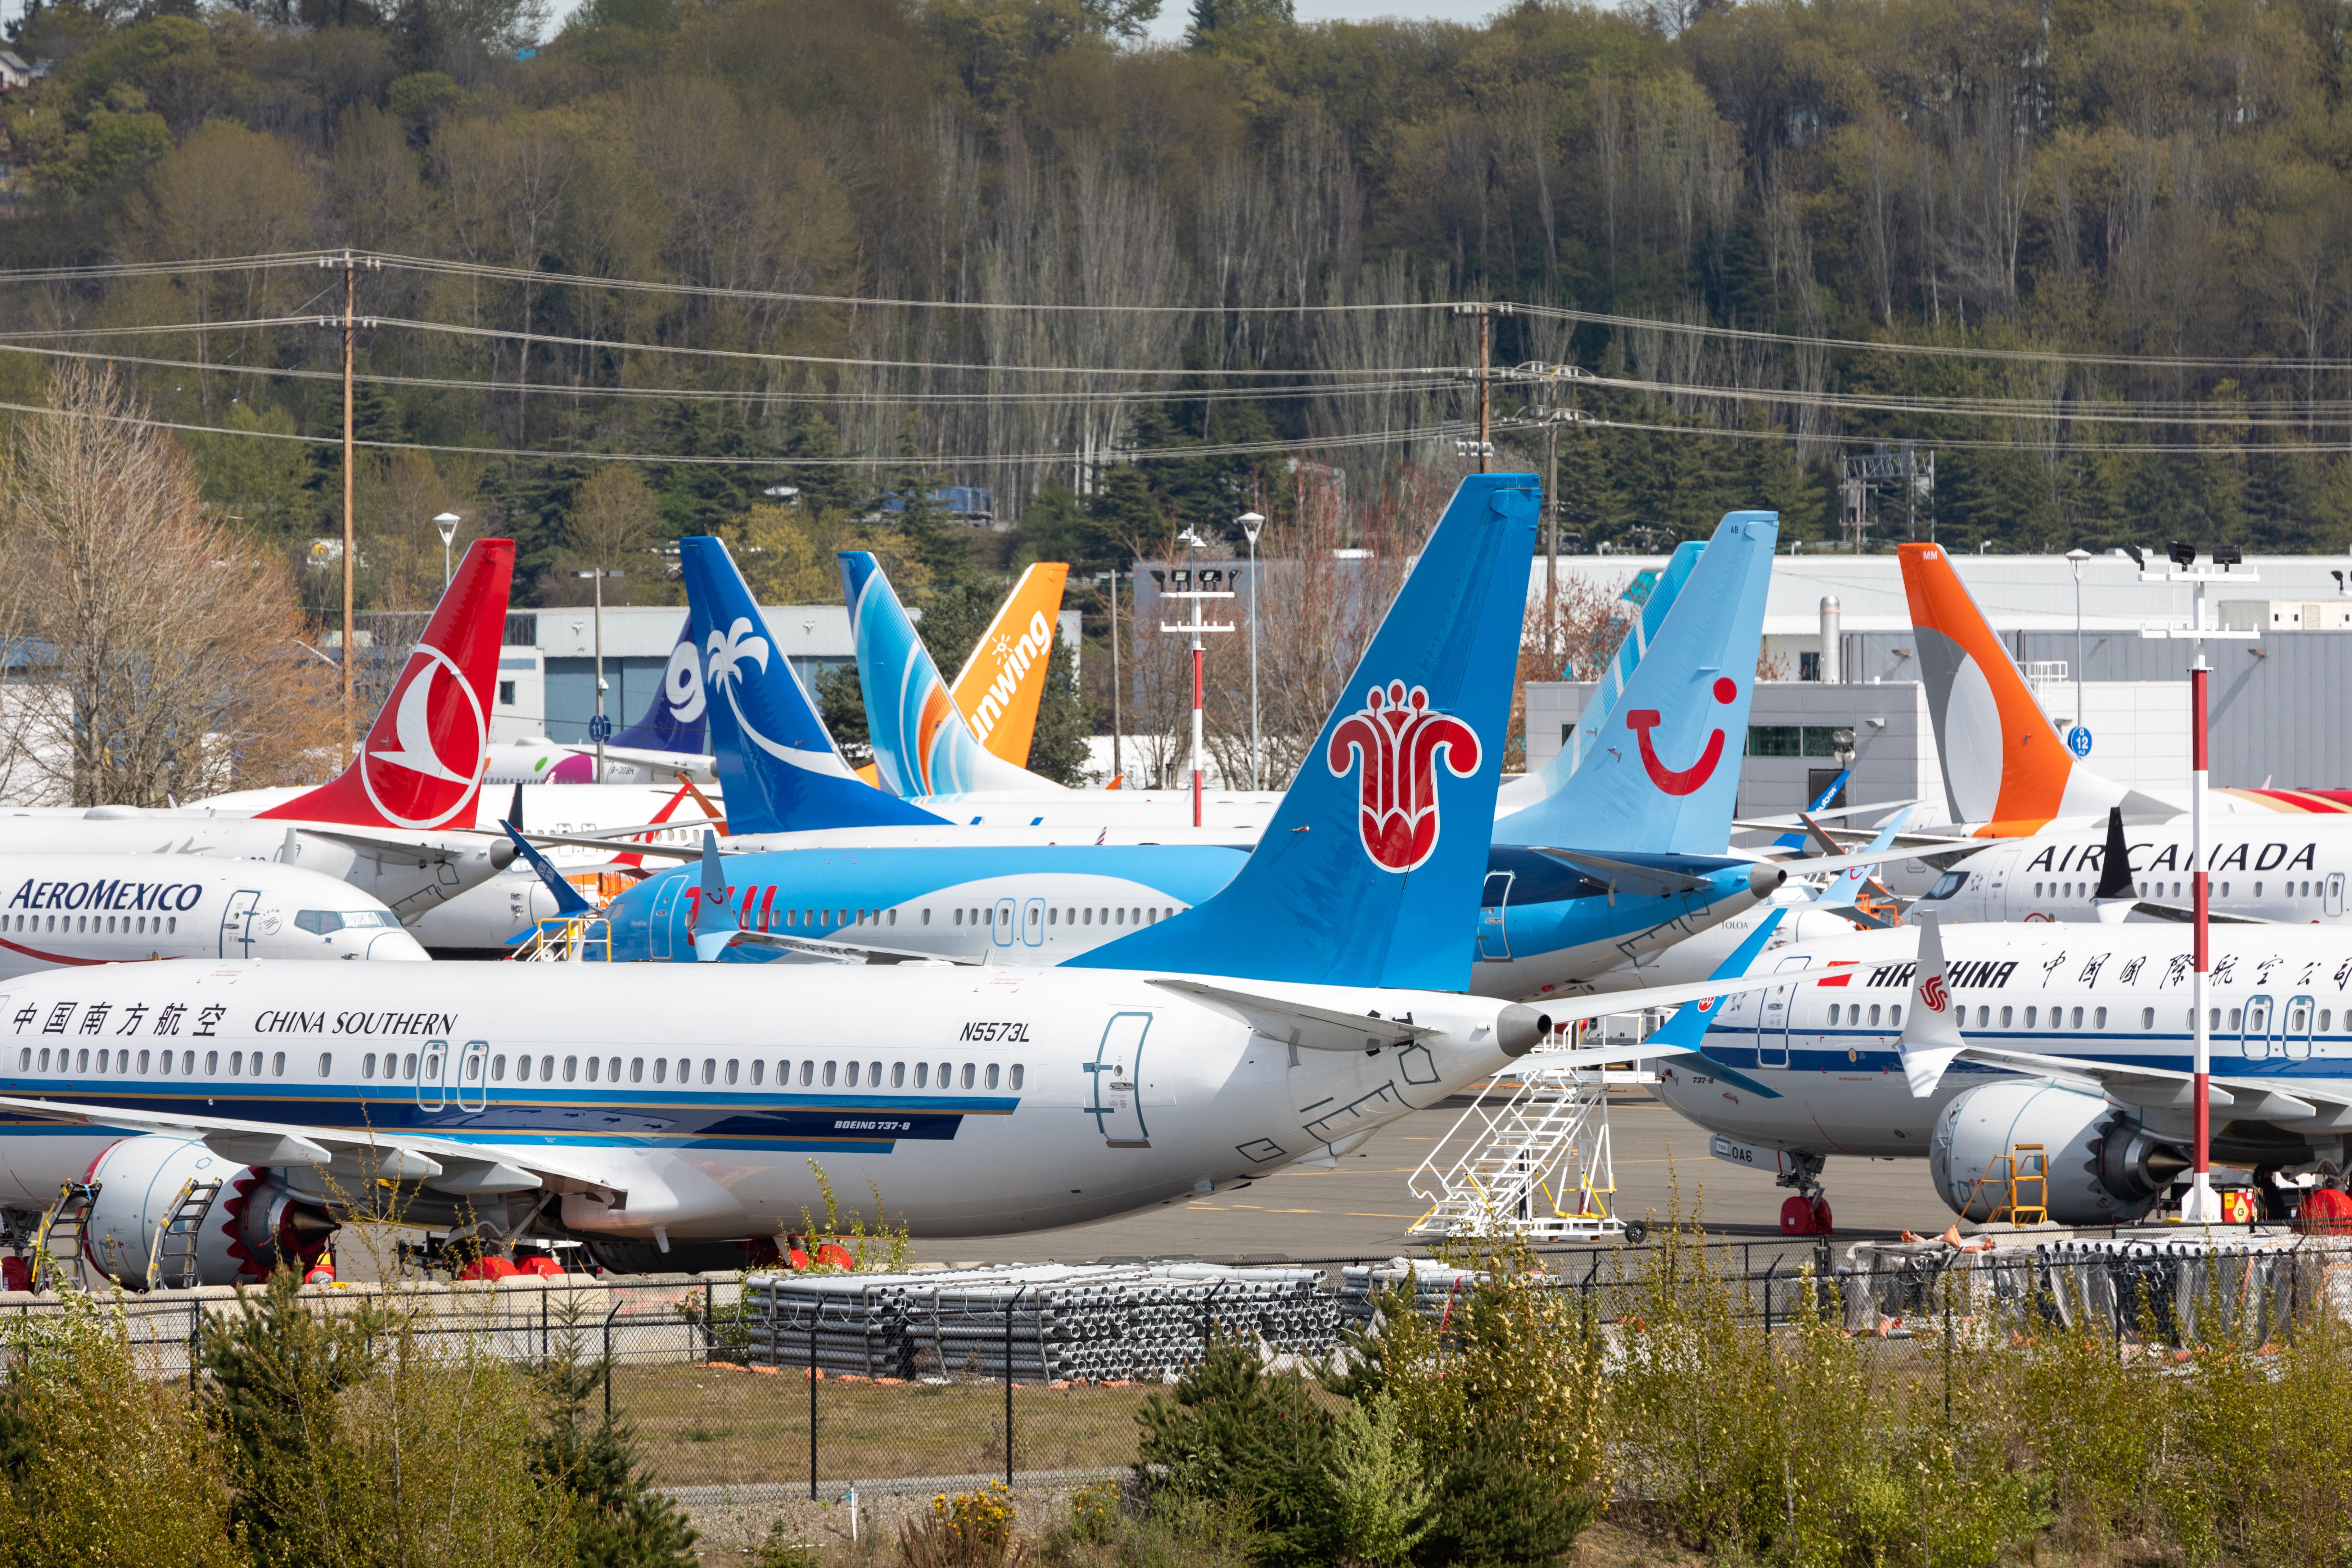 Grounded Boeing 737 MAX 8 aircraft parked at Boeing field in April 2020.